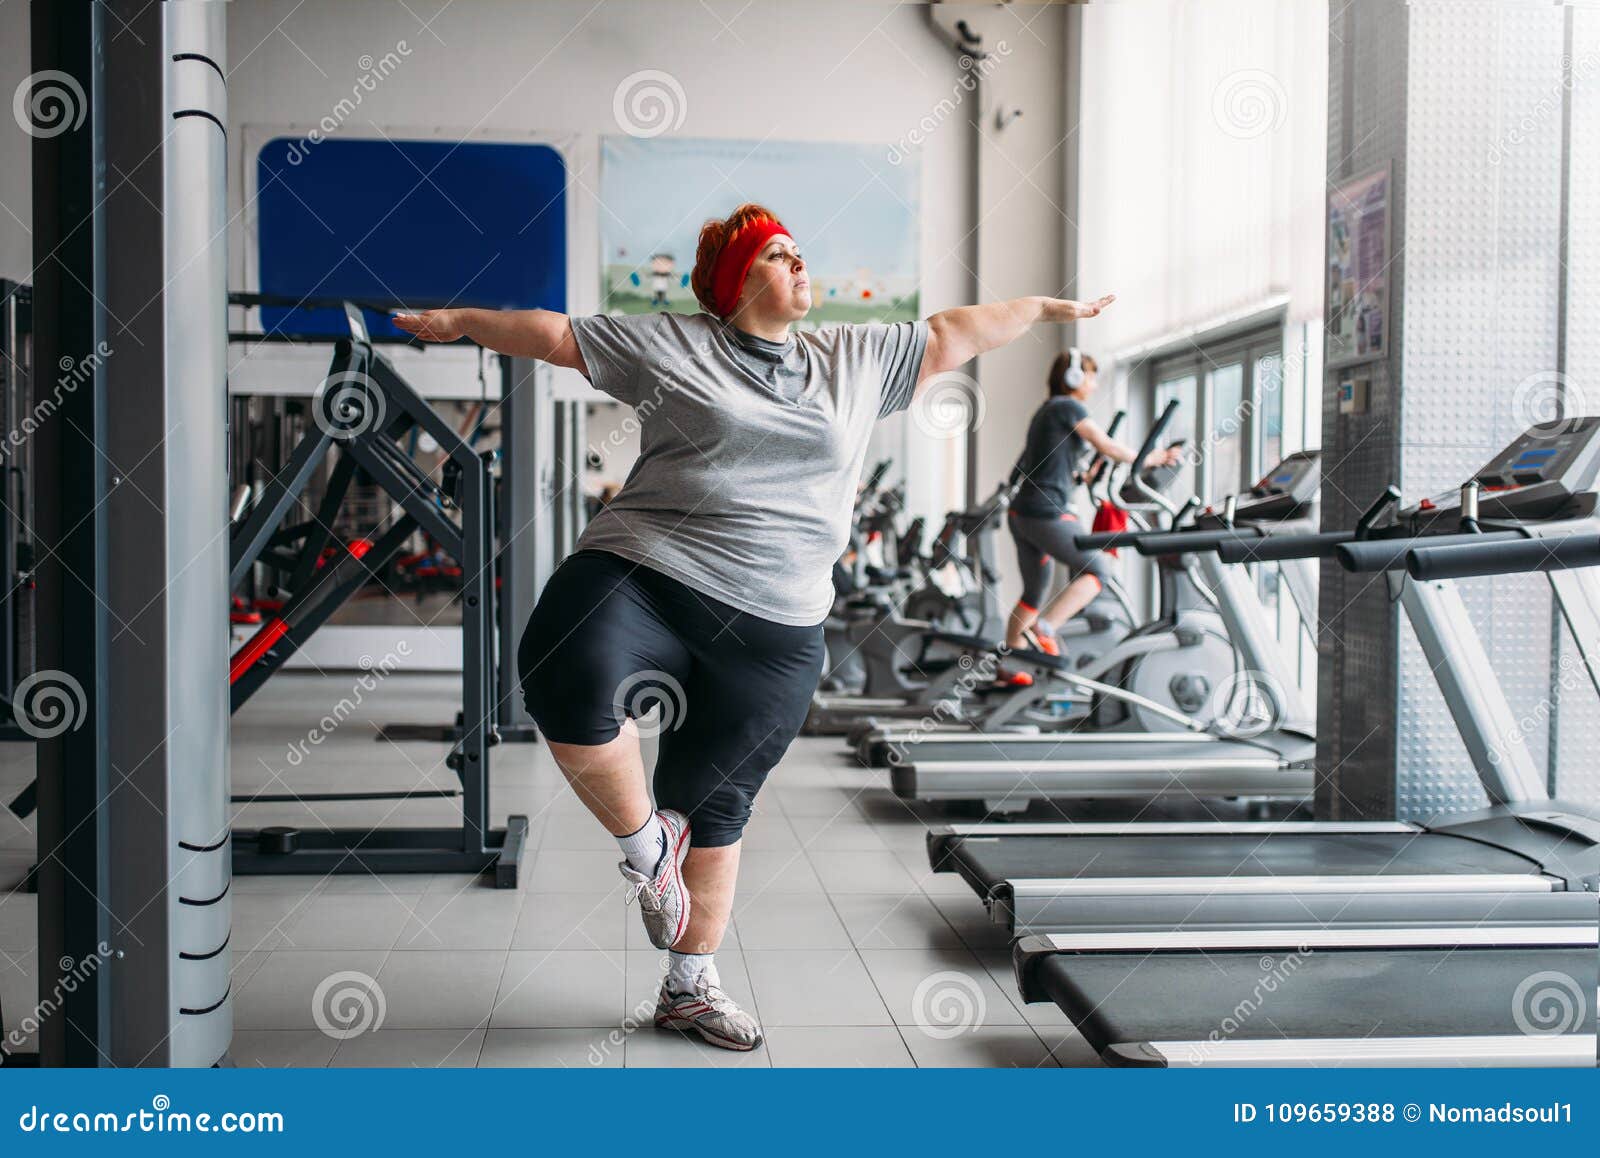 A fat woman is engaged in aerobics and trying to lose weight. An